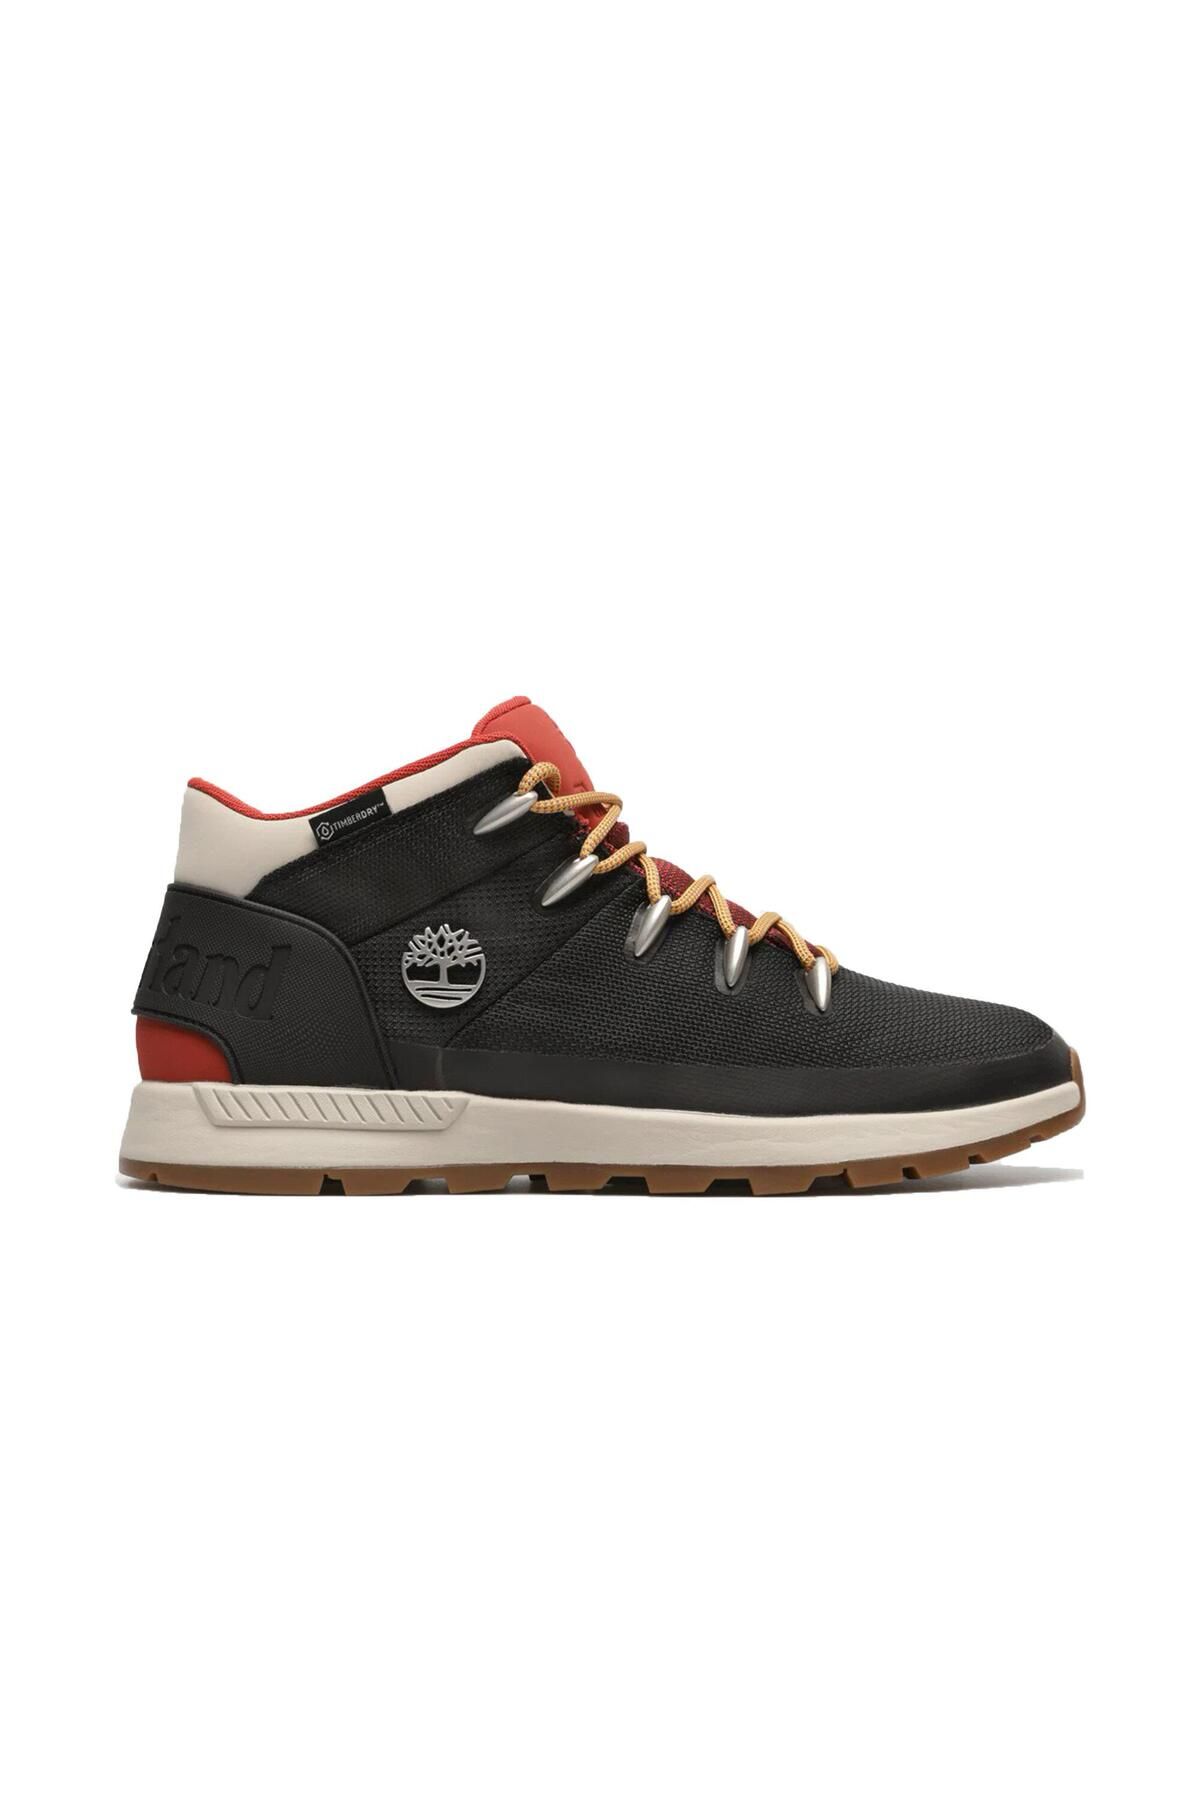 Timberland TİMBERLAND MID LACE UP WATERPROOF SNEAKER TB0A61QG0151